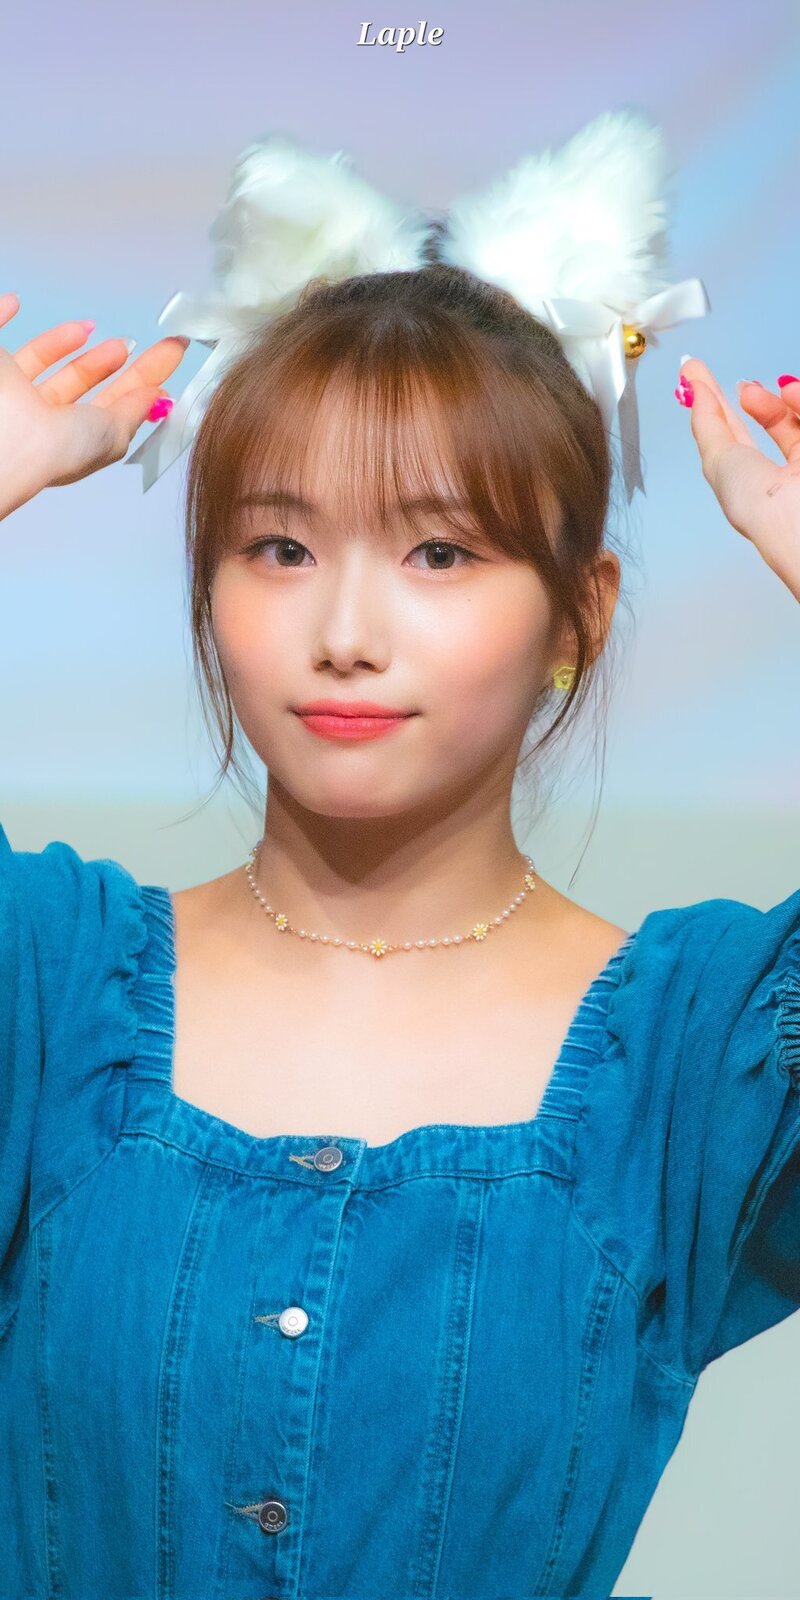 220725 Kep1er Youngeun  - Apple Music Fansign documents 2